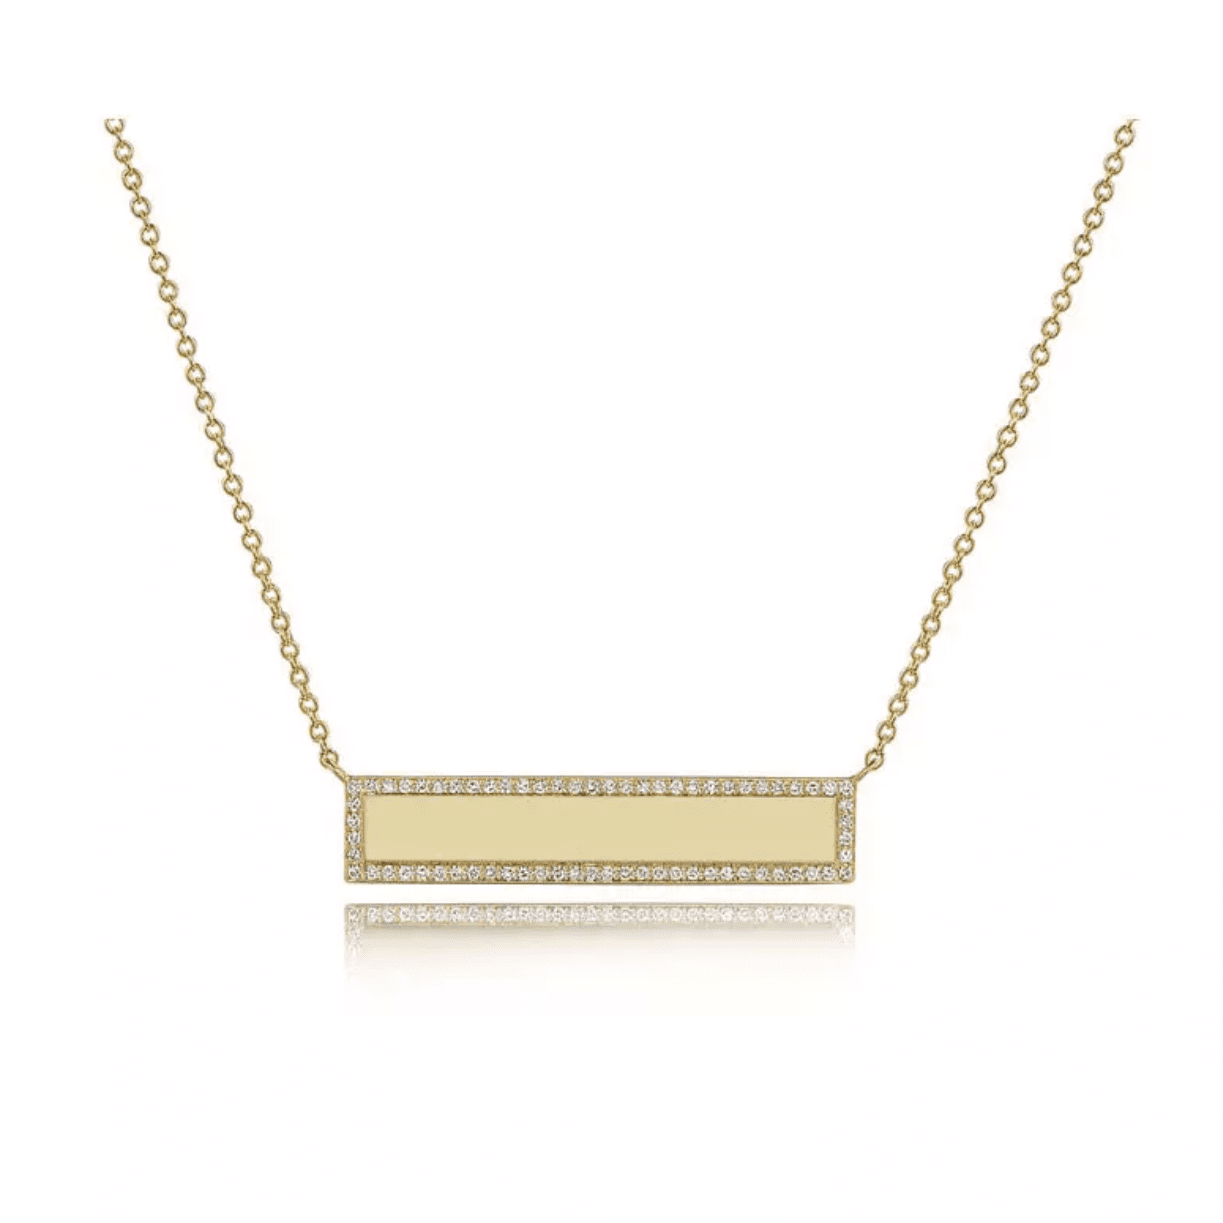 Diamond Engravable Bar Necklace by King Jewelers